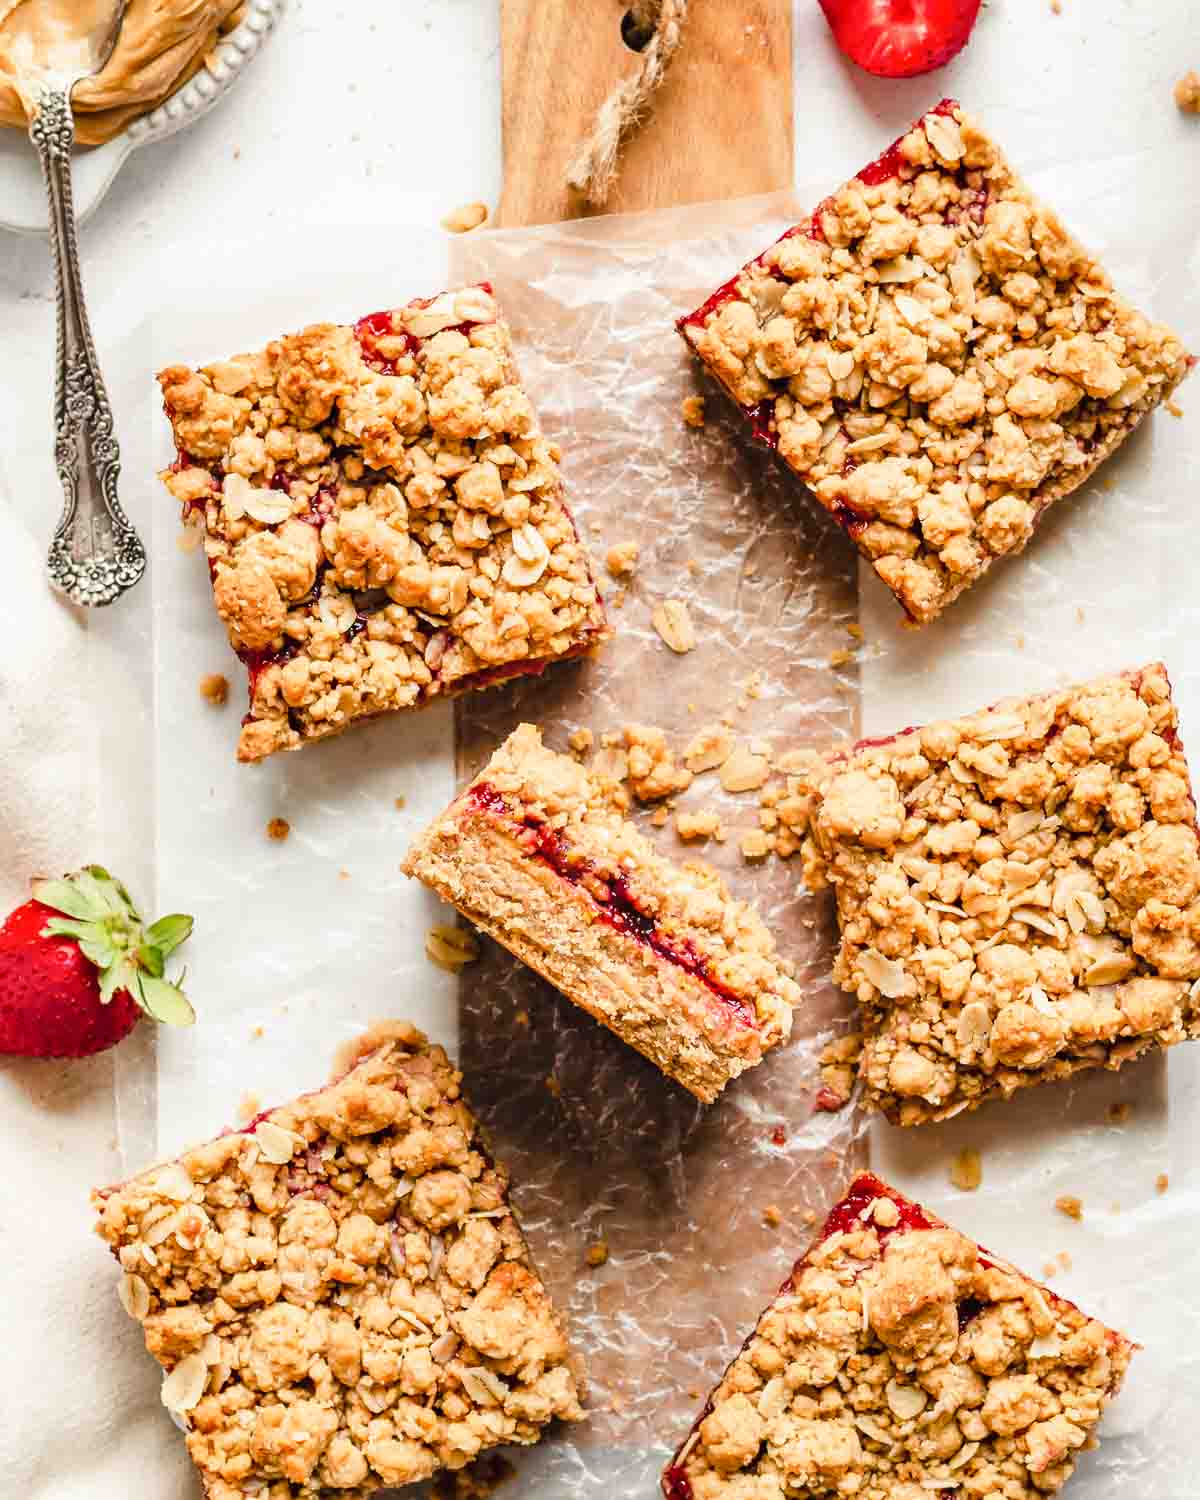 Peanut butter jelly bars on a cutting board.